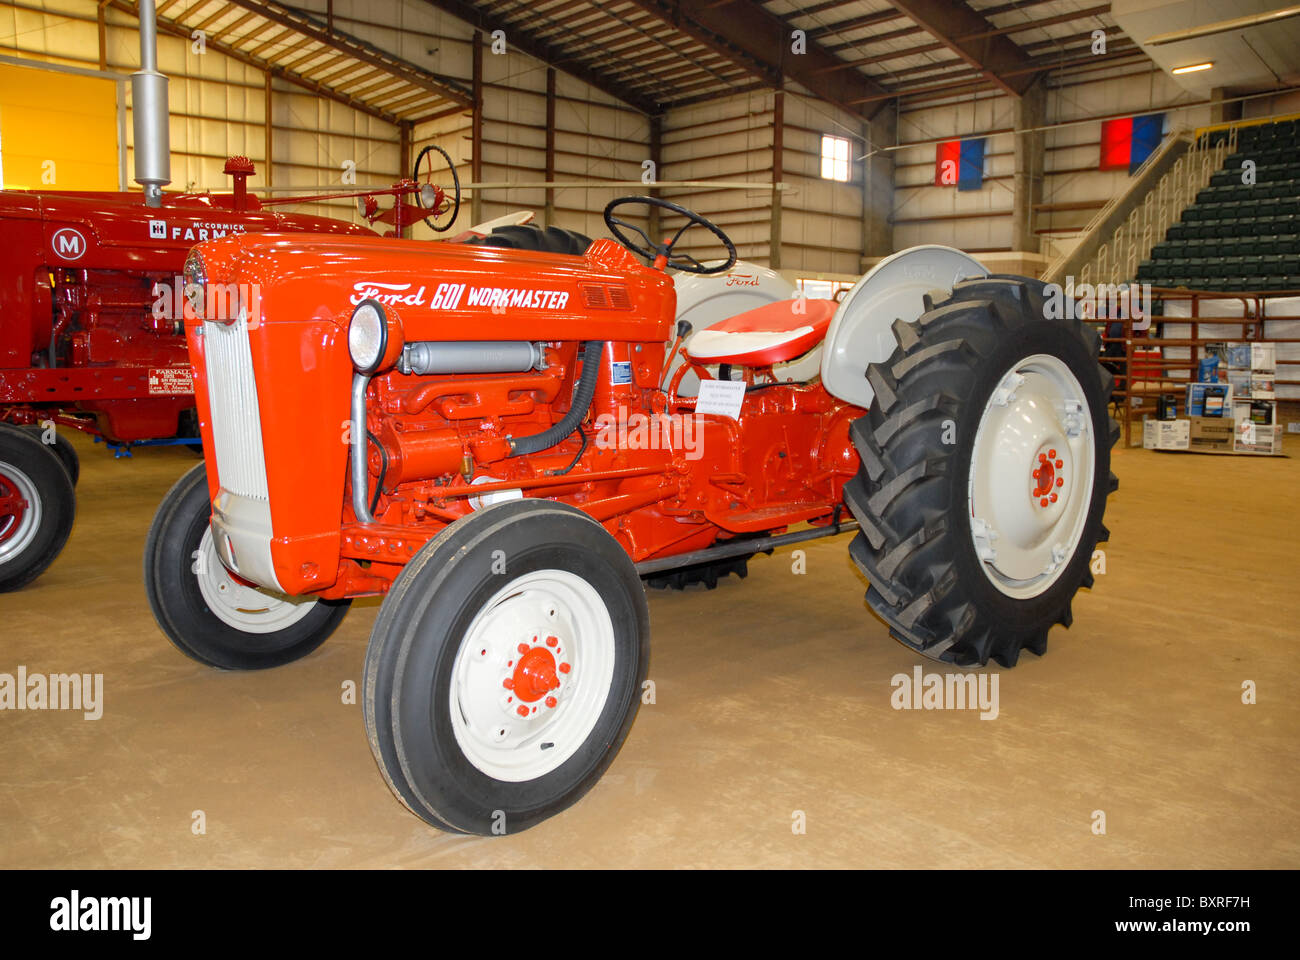 A Ford Tractor on display at a farm show. Stock Photo